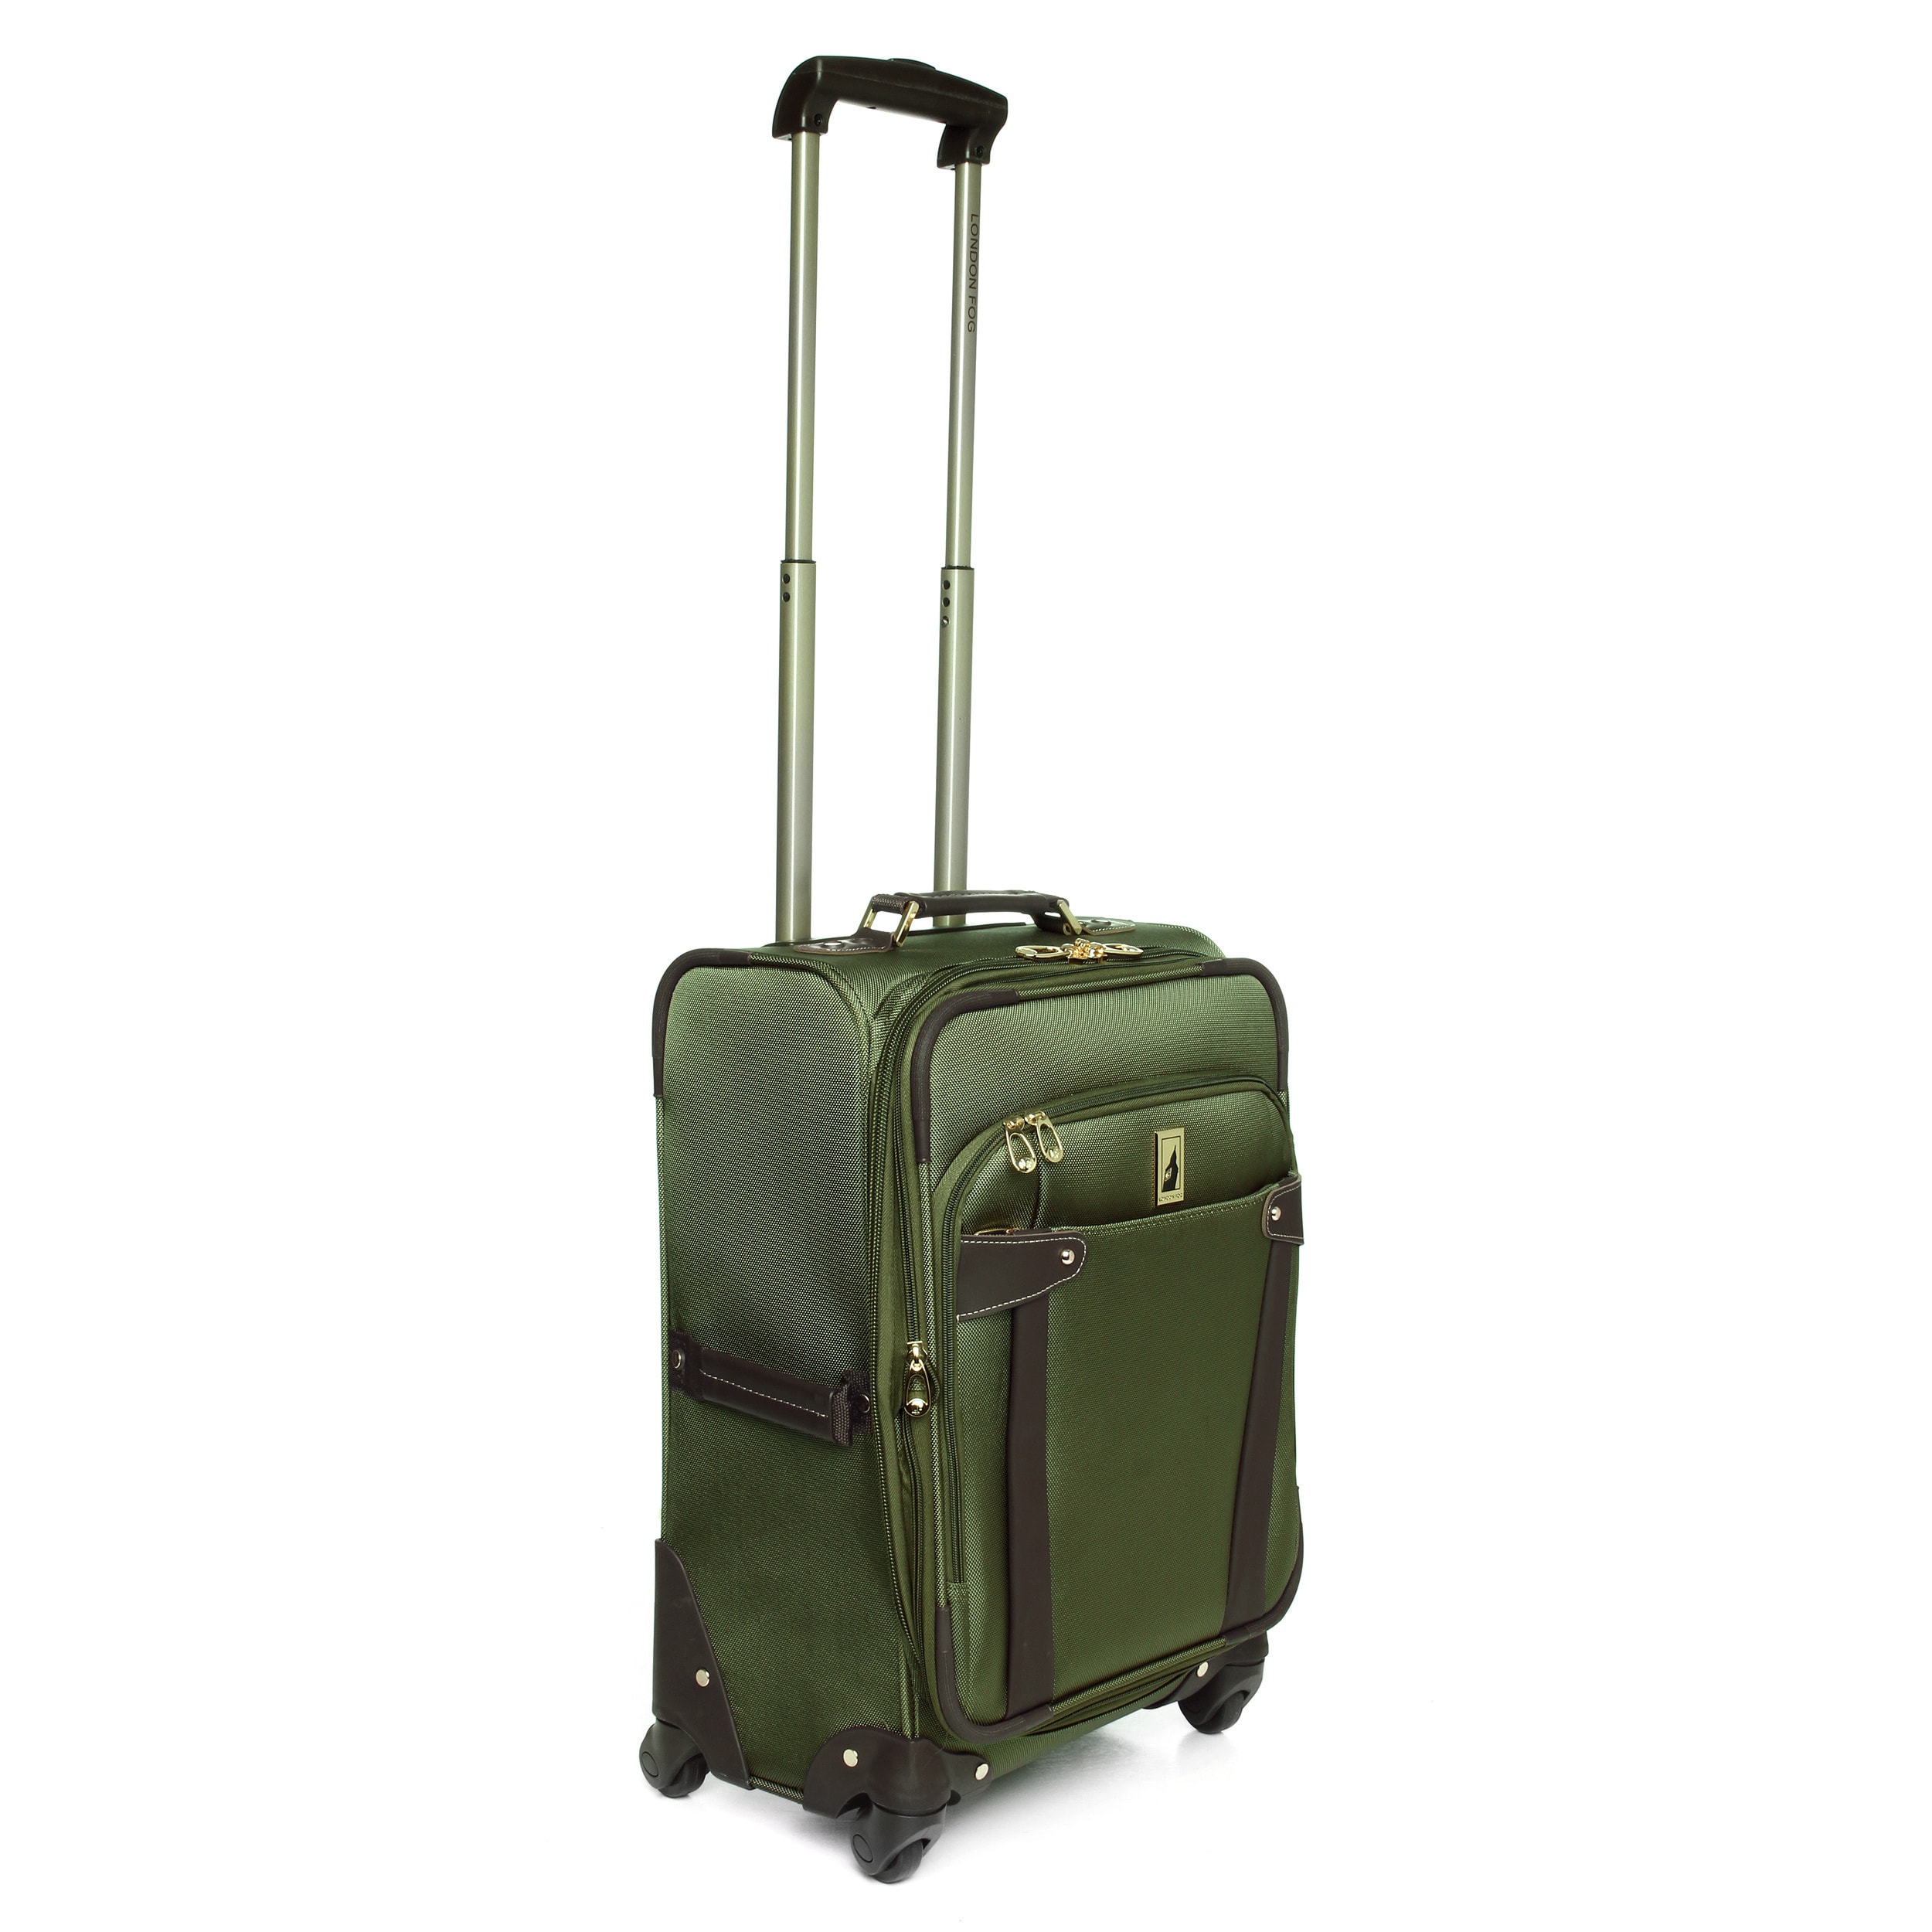 London Fog Newbury Ii Spruce 20 inch Carry On Expandable 360 degree Spinner Upright (OliveWeight 9.5 poundsPockets Two (2) front, one (1) rear exterior pockets for last minute items, one (1) mesh zipped pocket inside Handle Aluminum locking push button